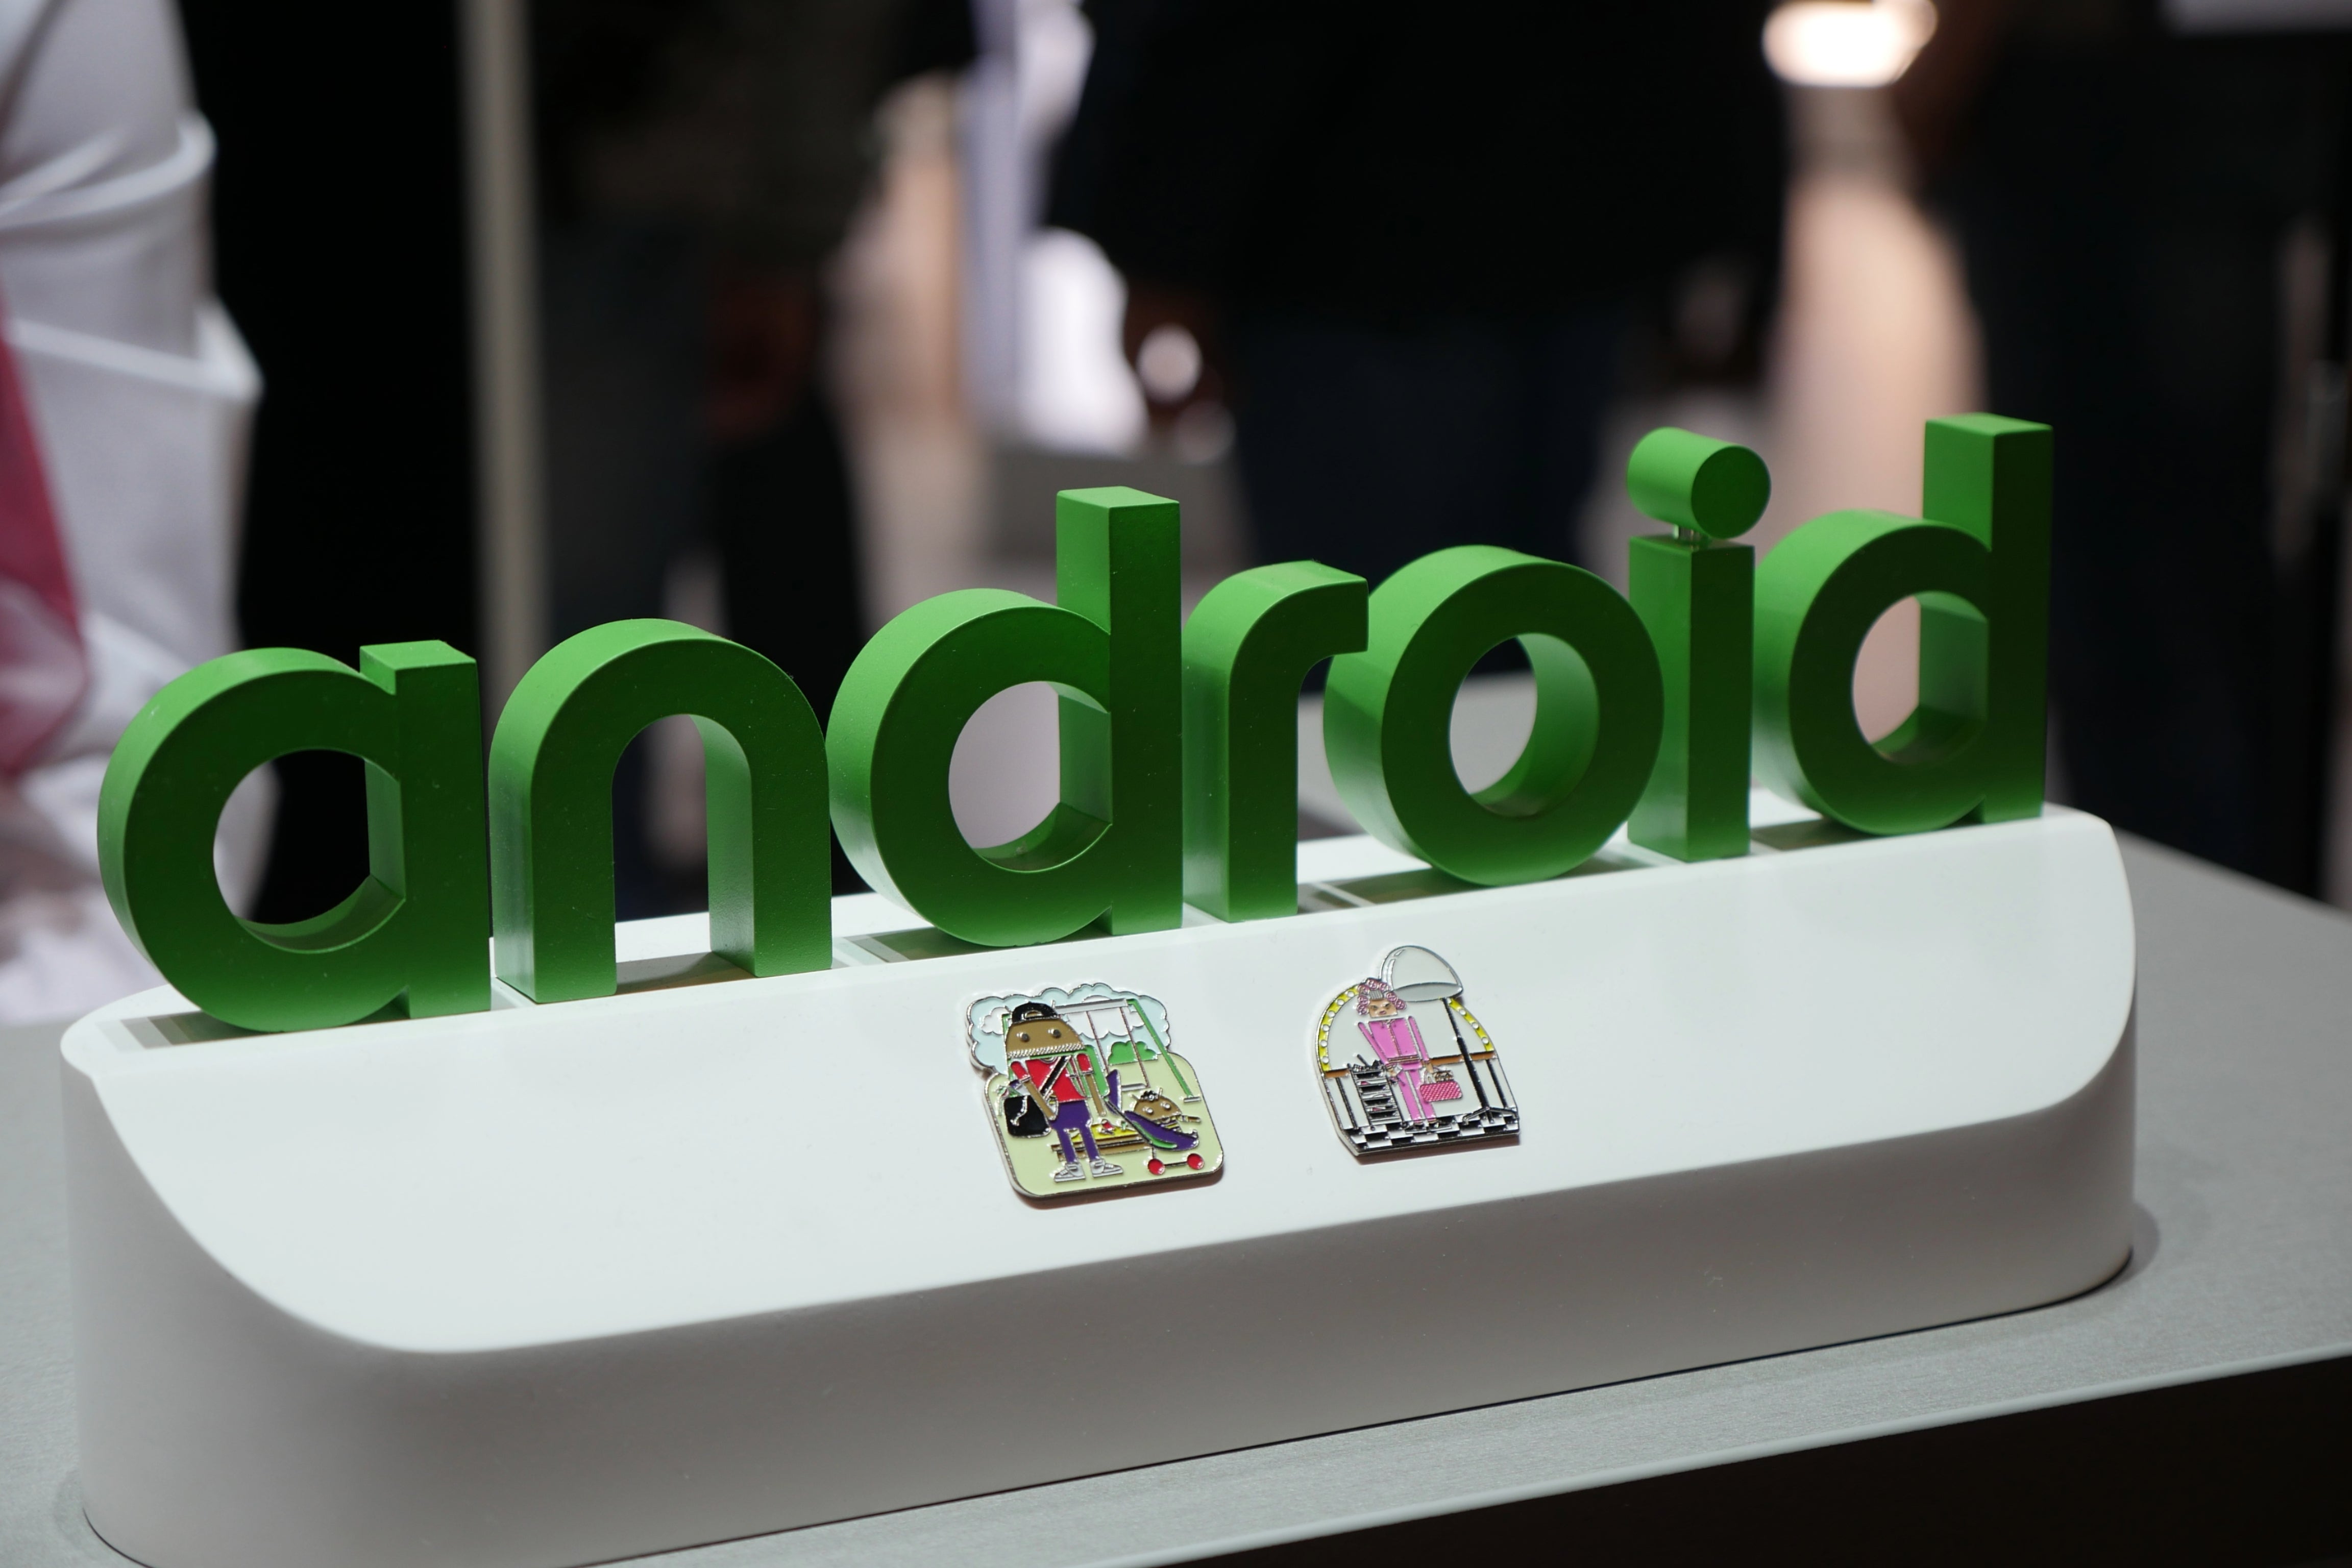 Image Credit–PhoneArena - Phoneageddon: Is your Android smartphone doomed after the updates end?